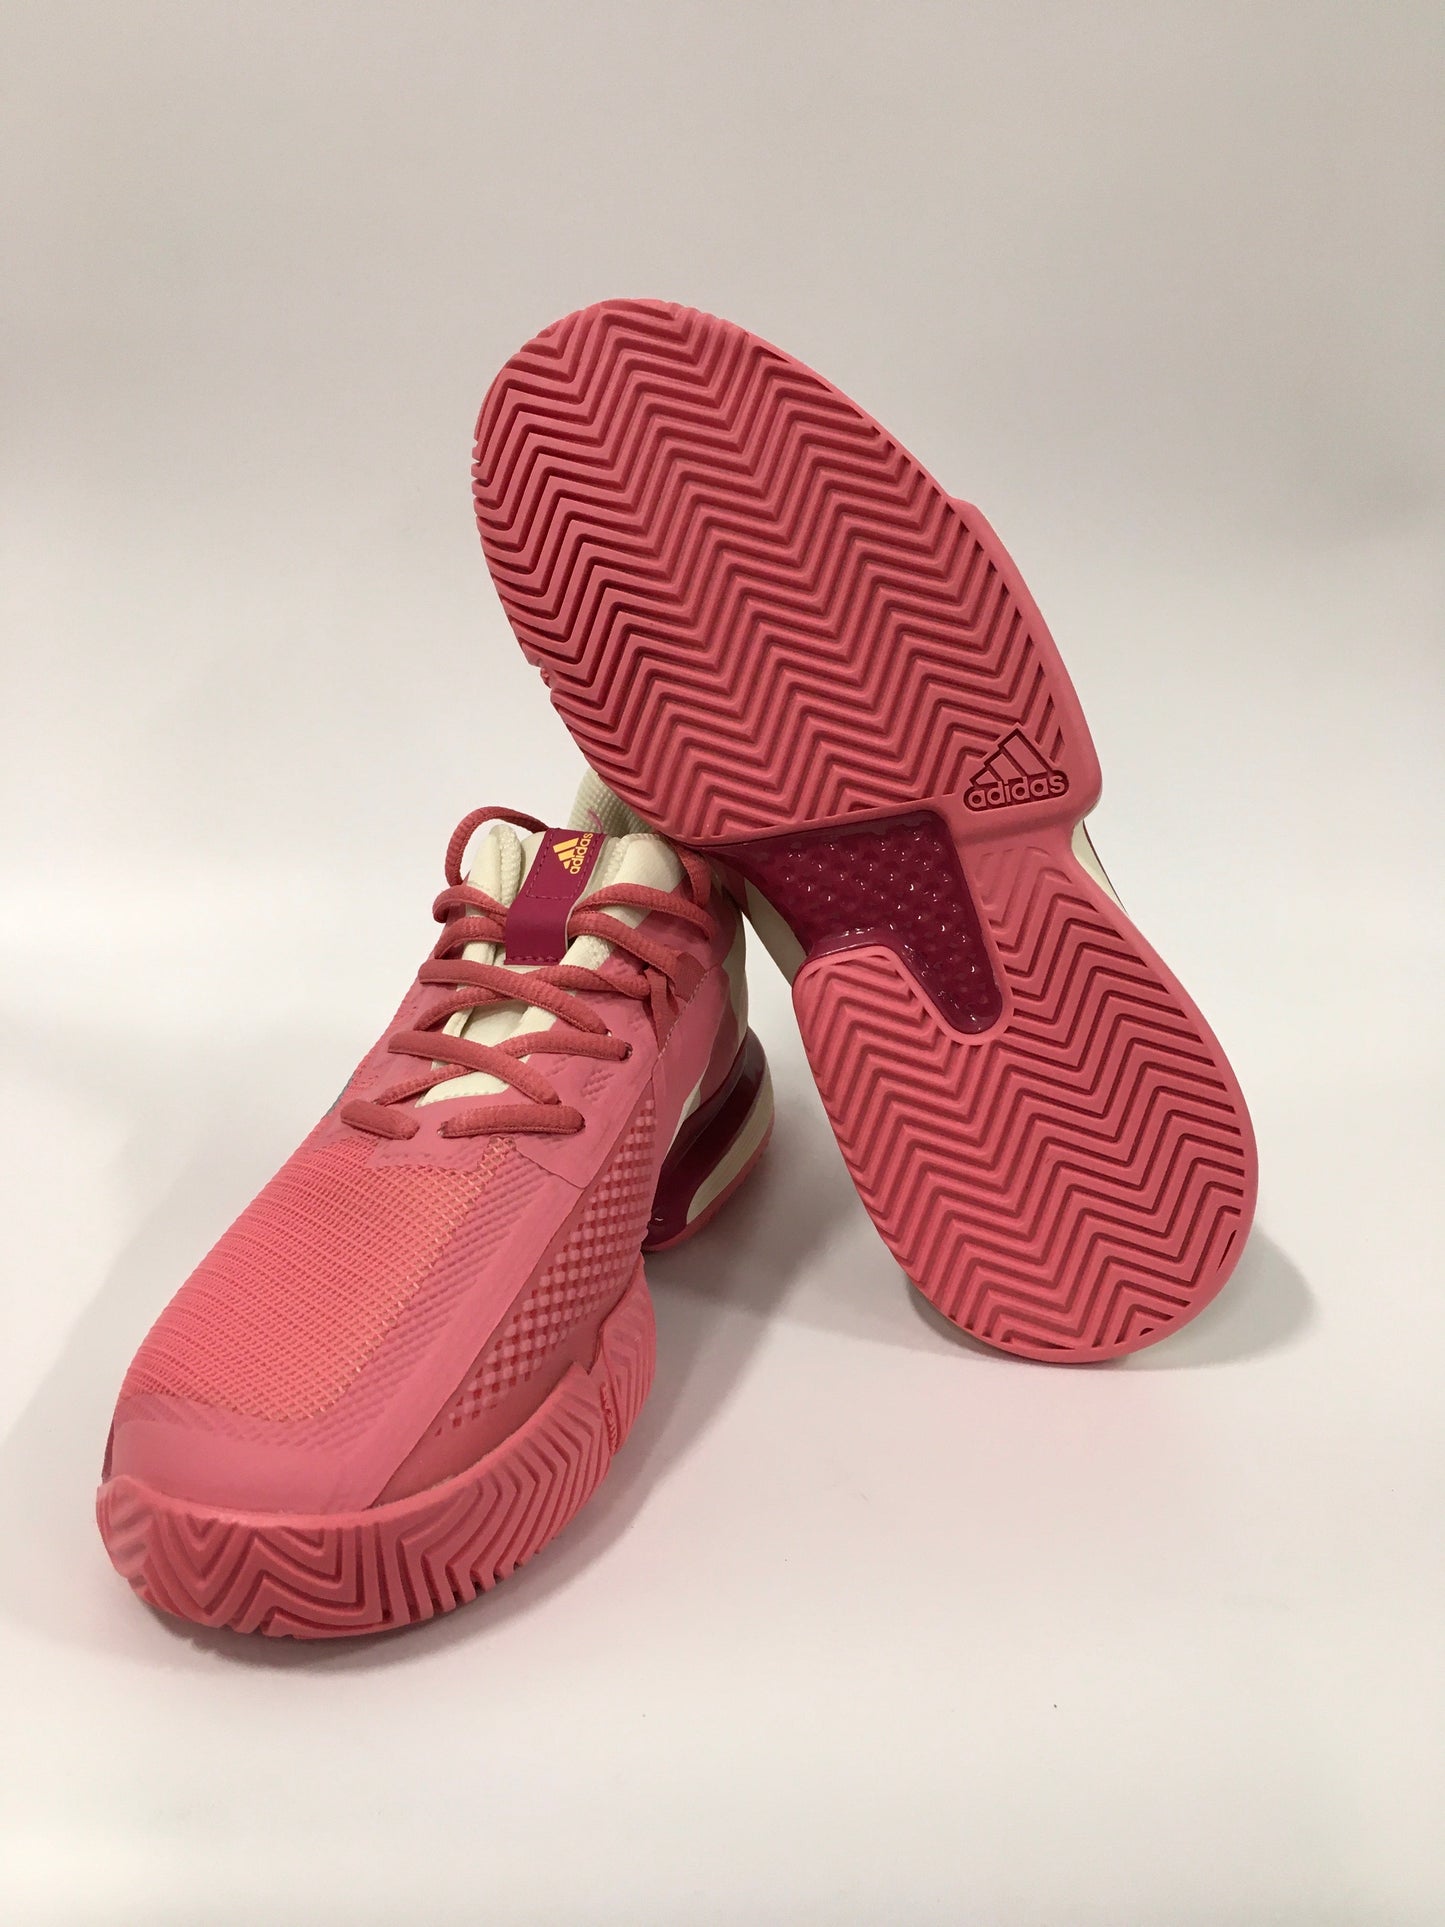 Pink Shoes Athletic Adidas, Size 8.5